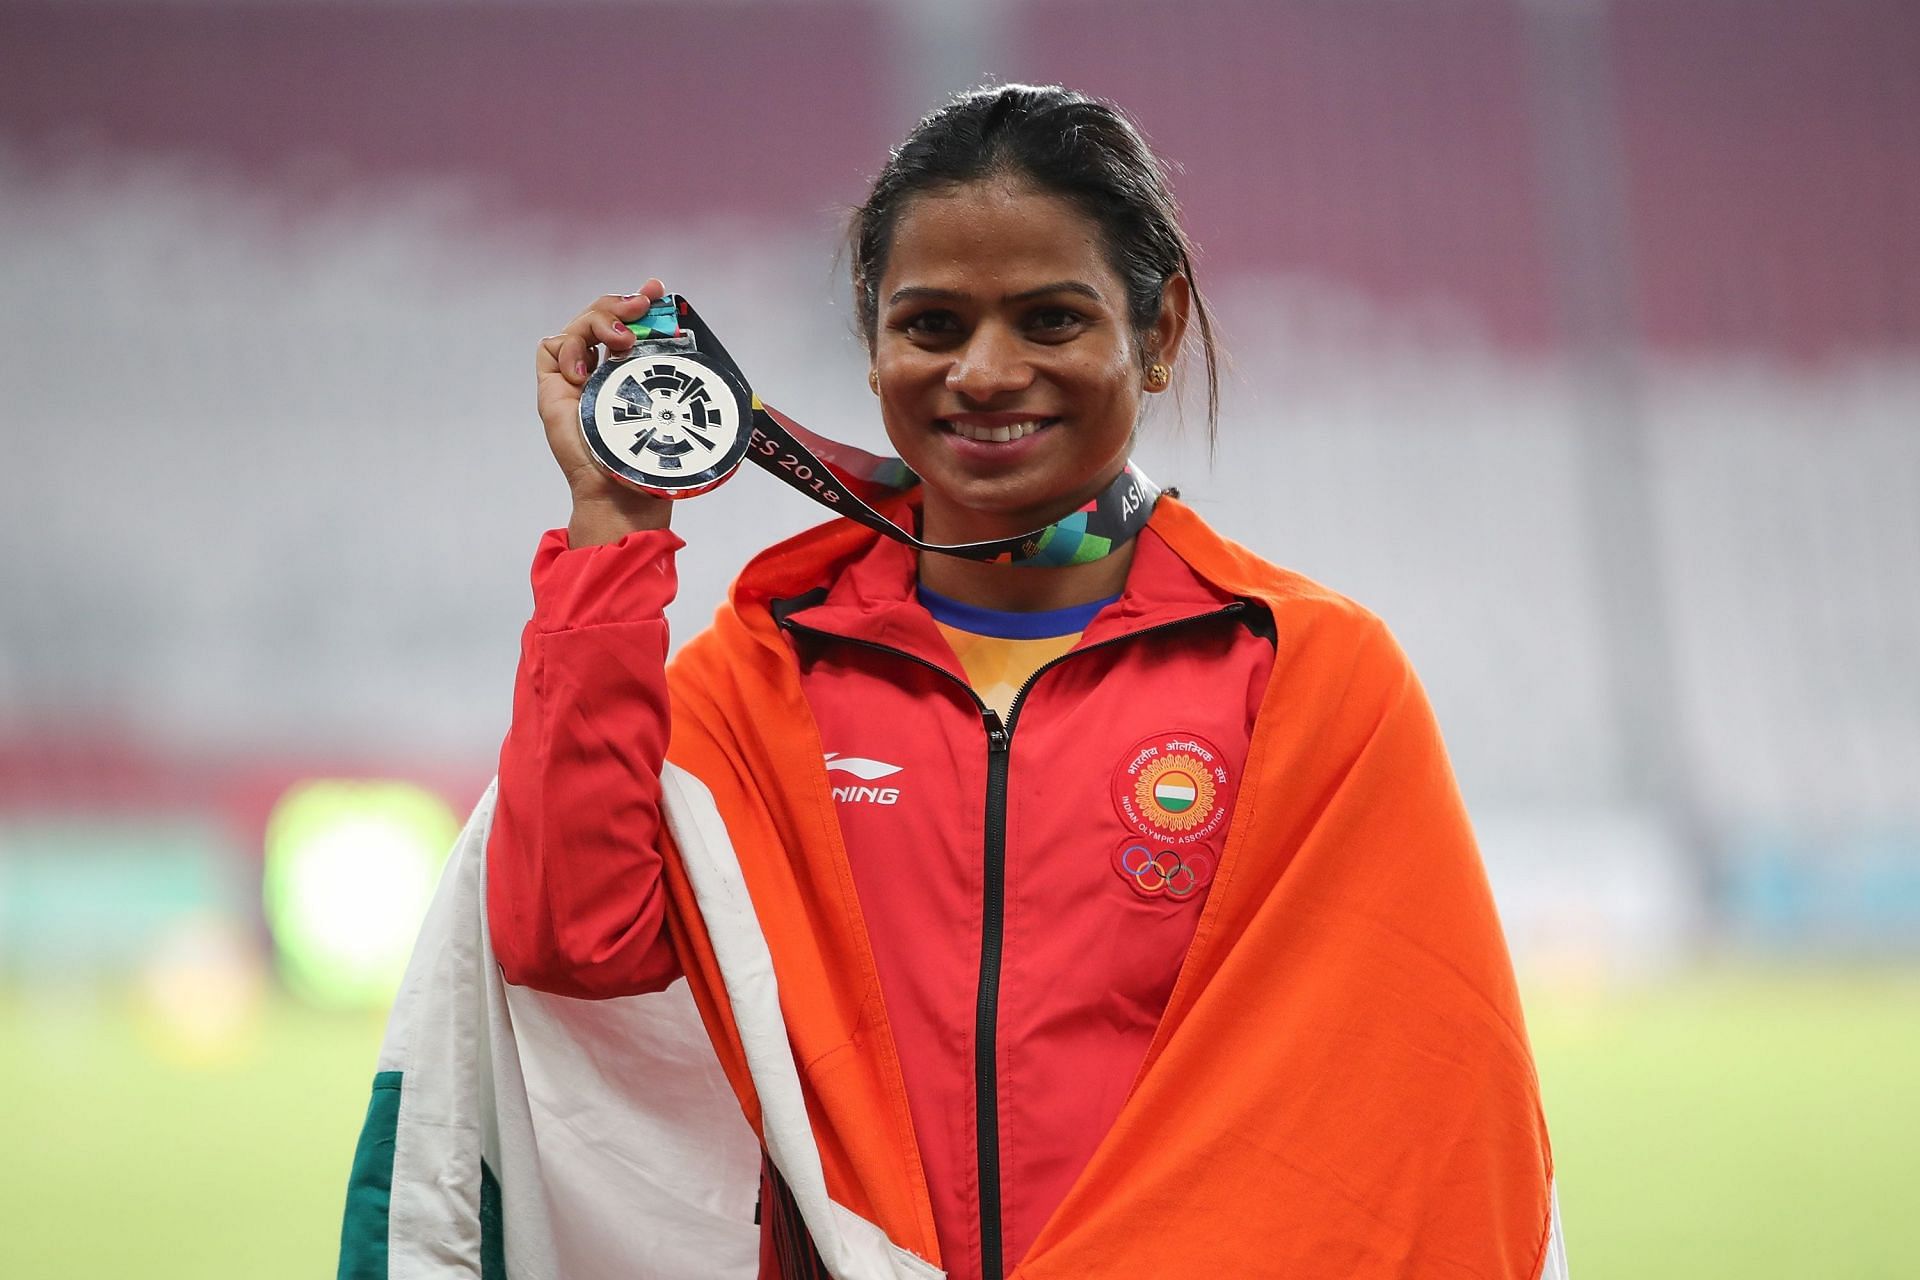 Dutee Chand at the 2018 Asian Games (Image courtesy: Getty Images)